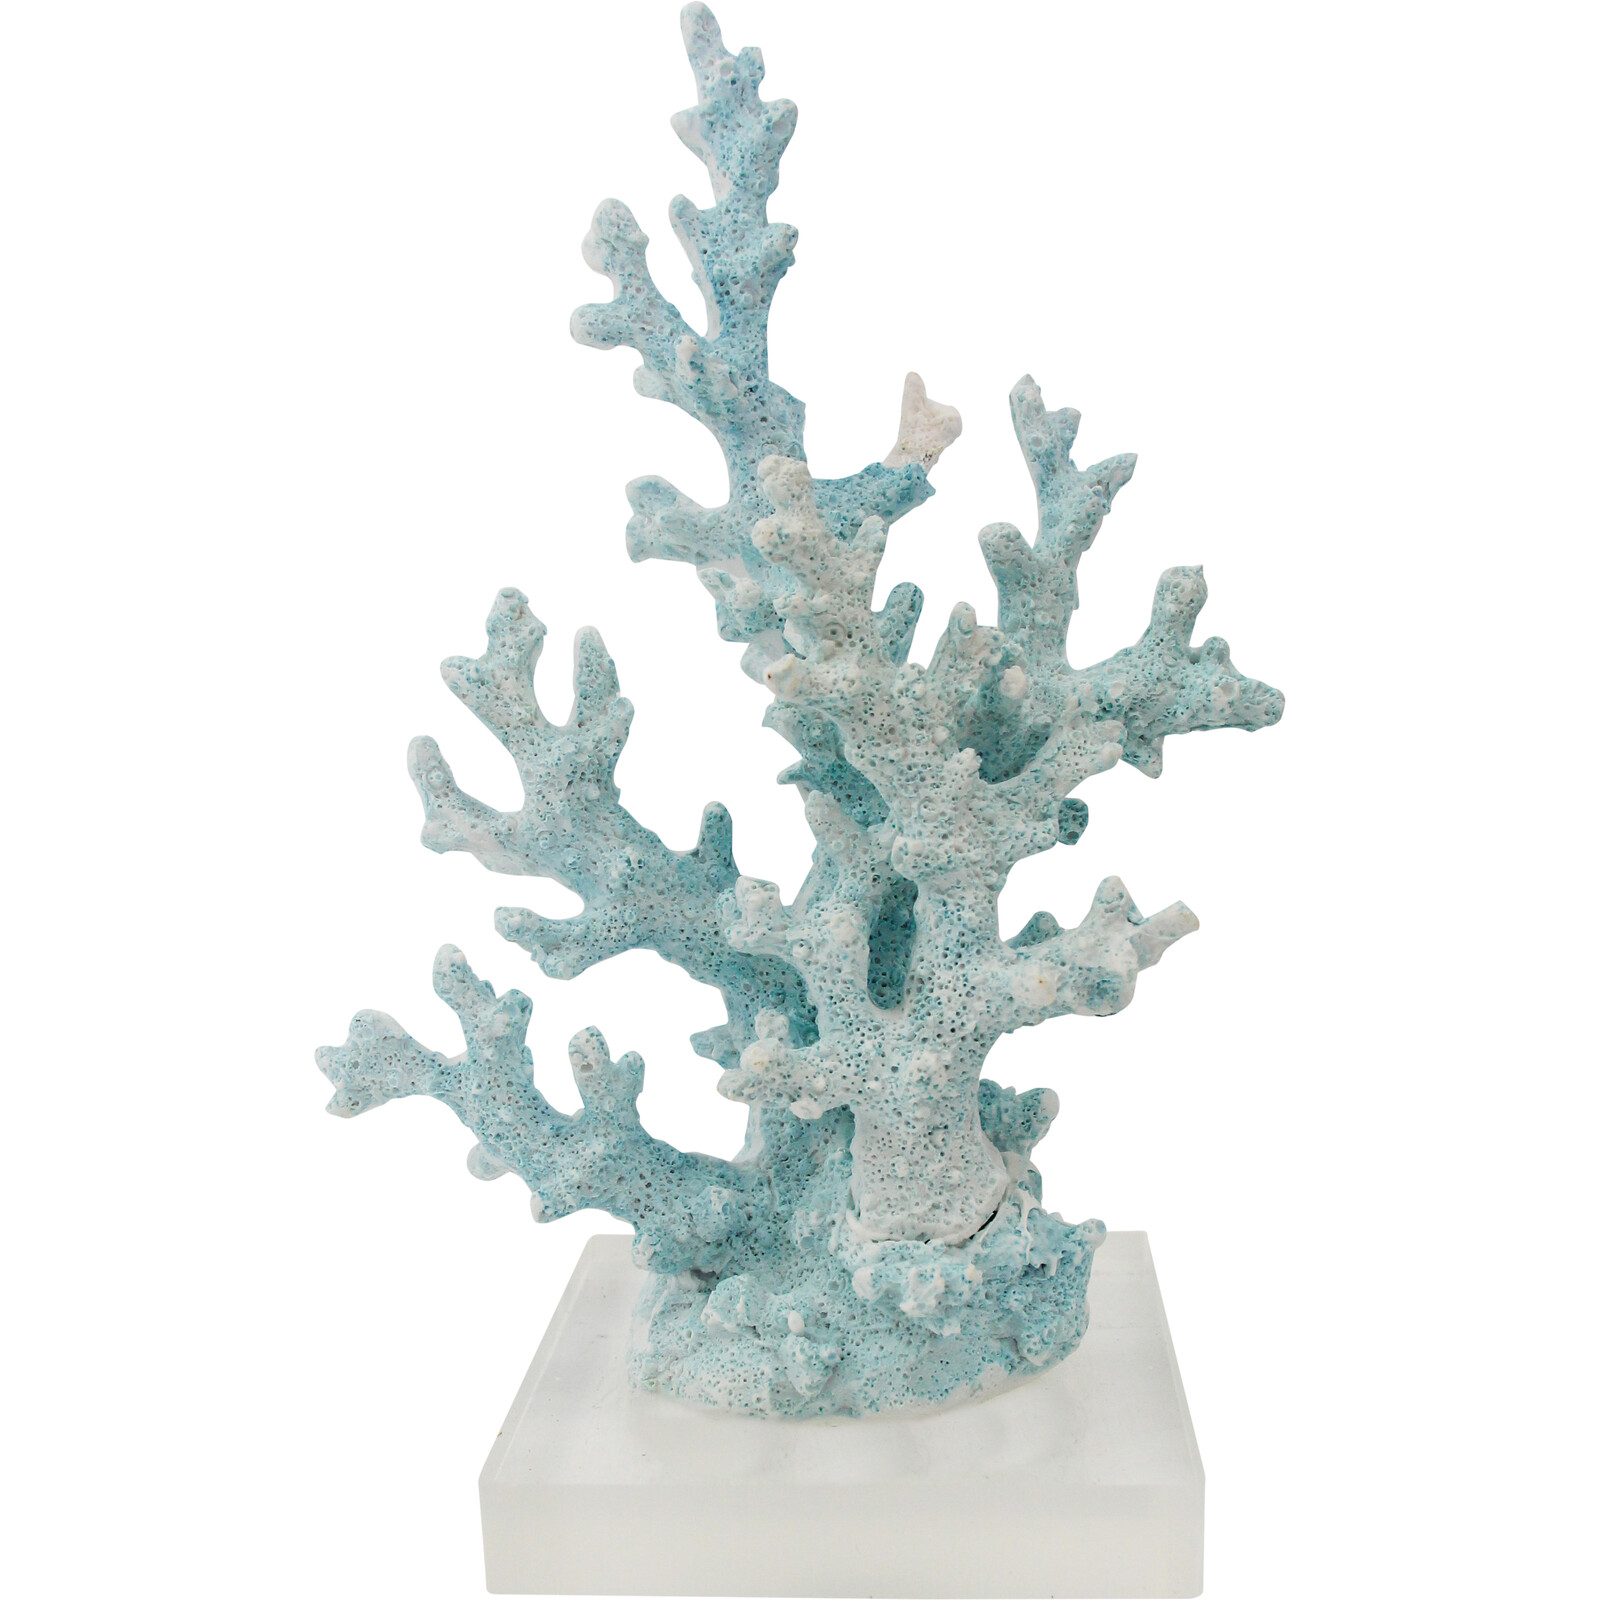 Coral Branching Ice Sml